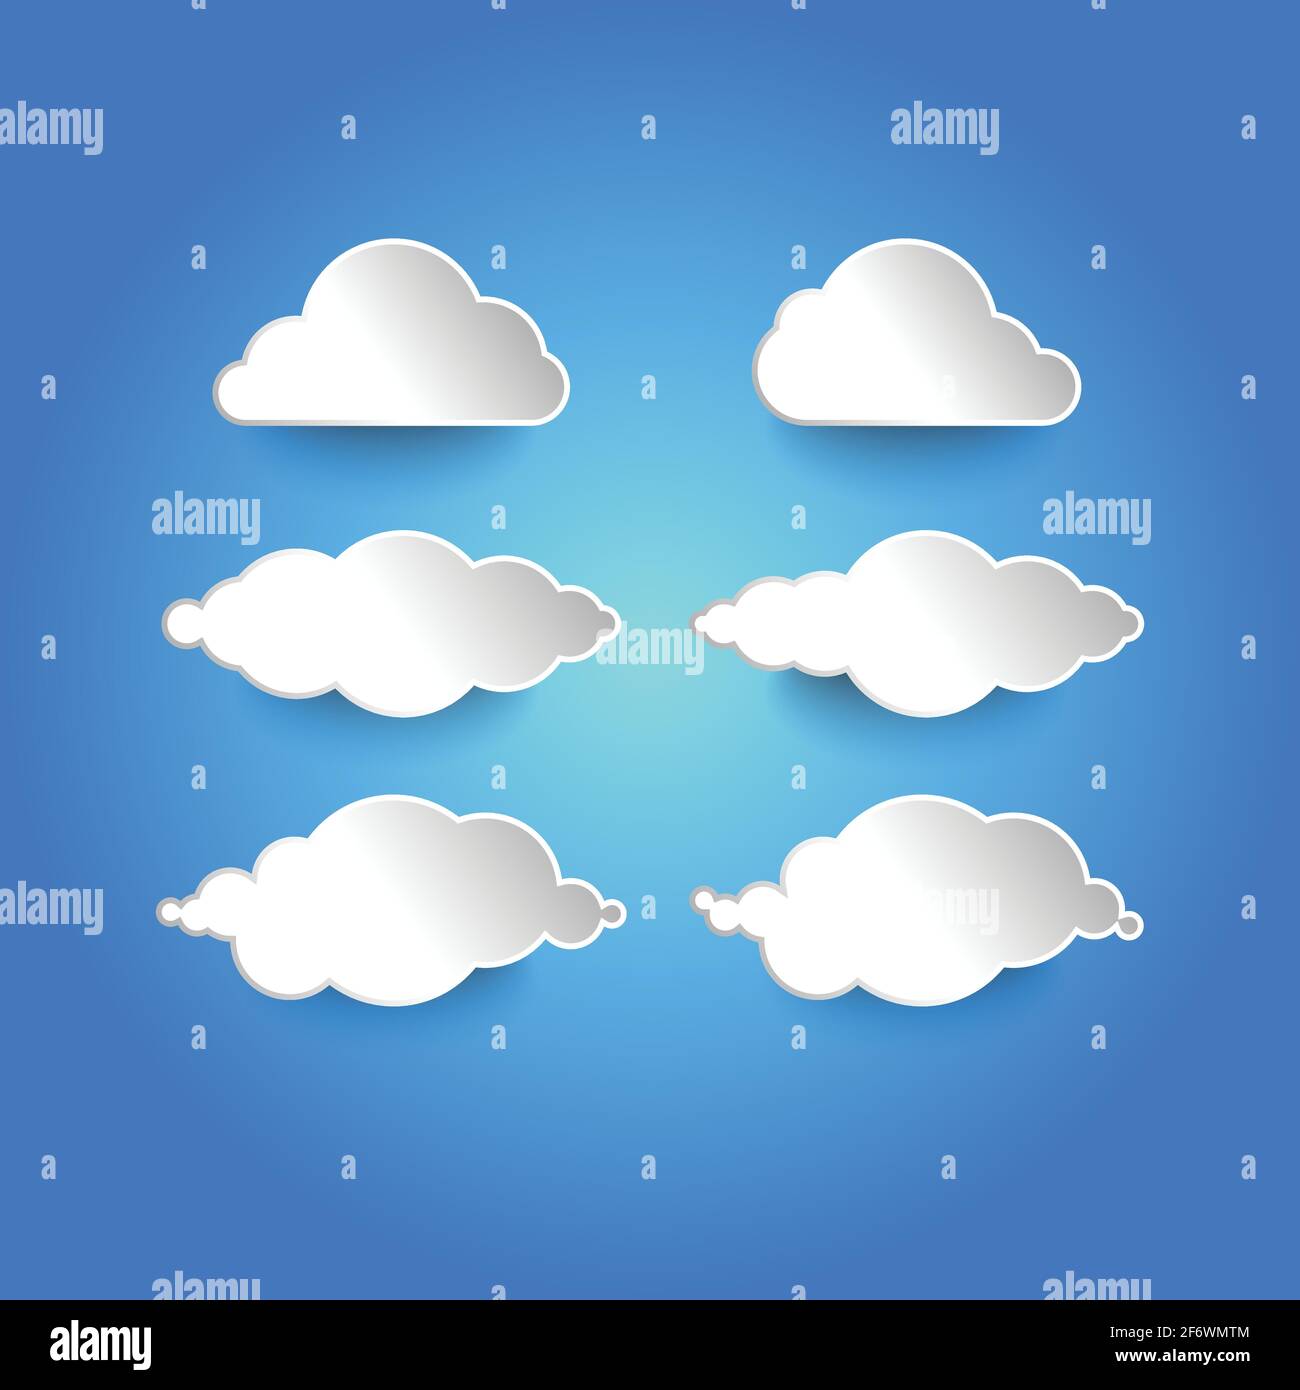 Vector illustration of clouds.clouds icon template. clouds background ...